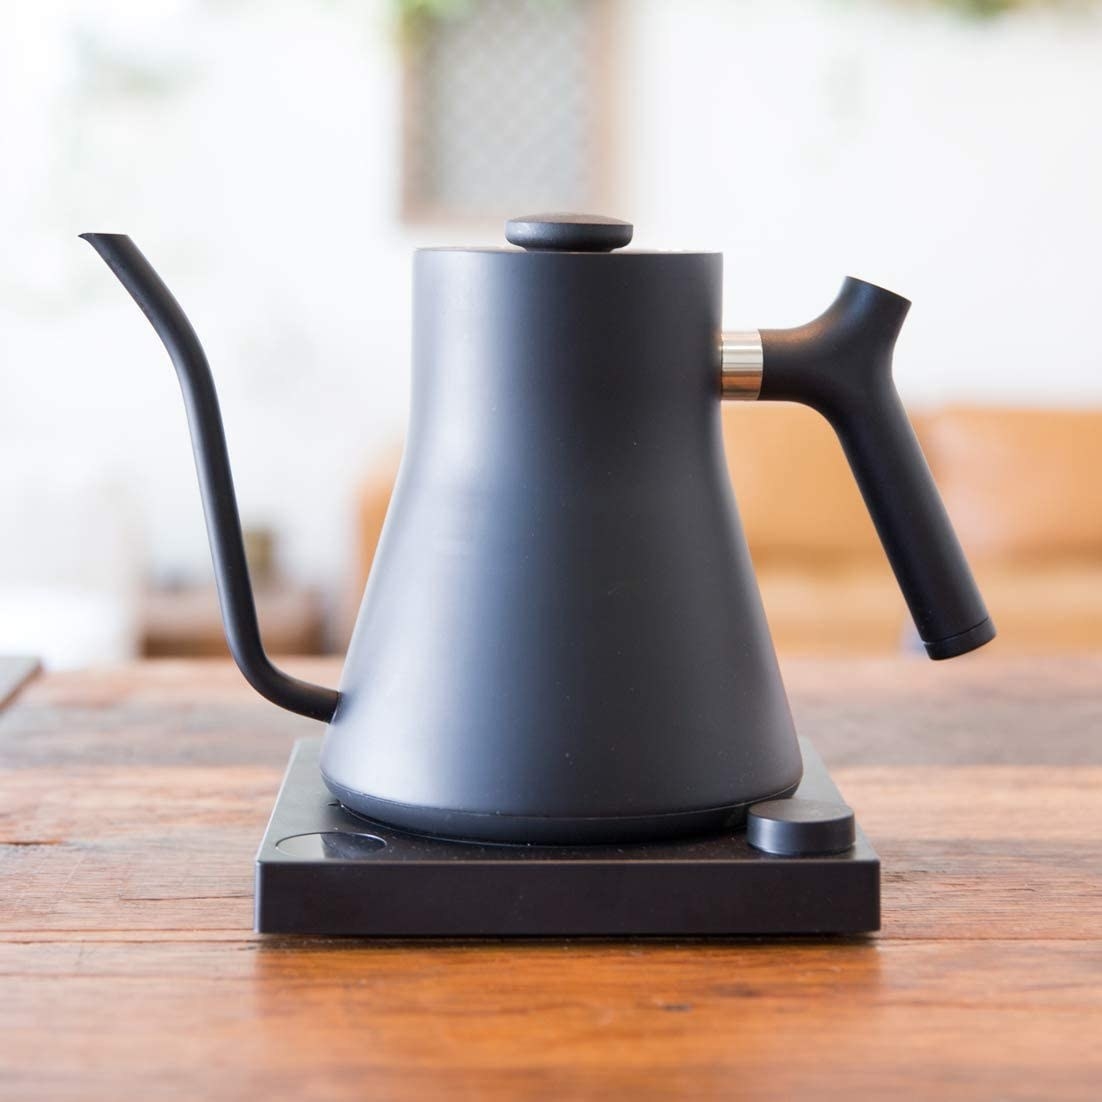 The black matte kettle with matching base